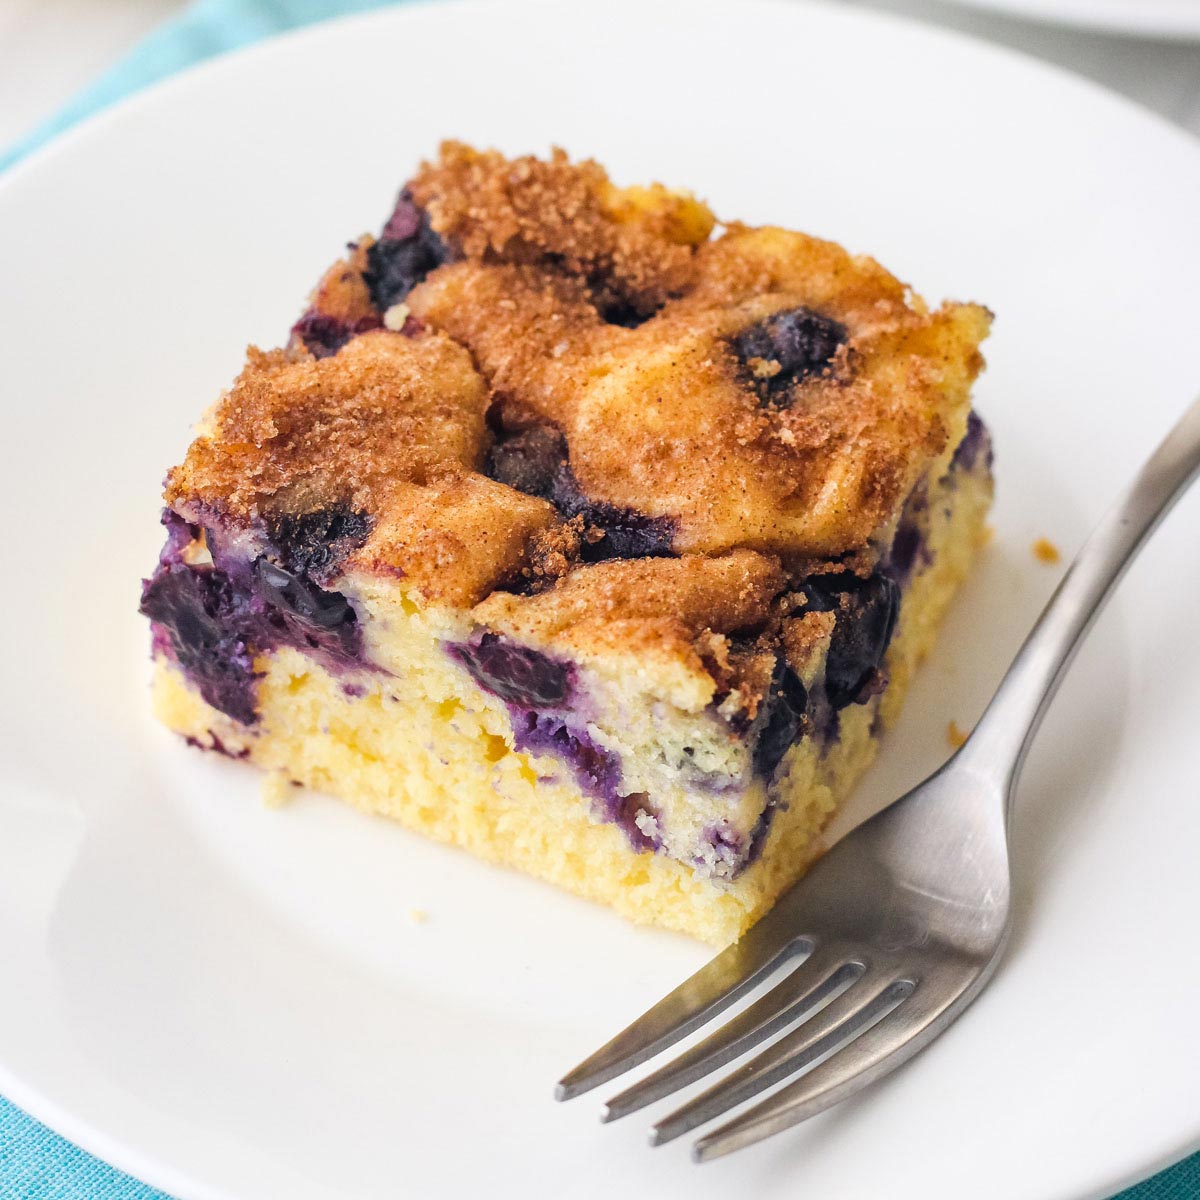 Close up of juicy blueberries on a piece of coffee cake on a plate.